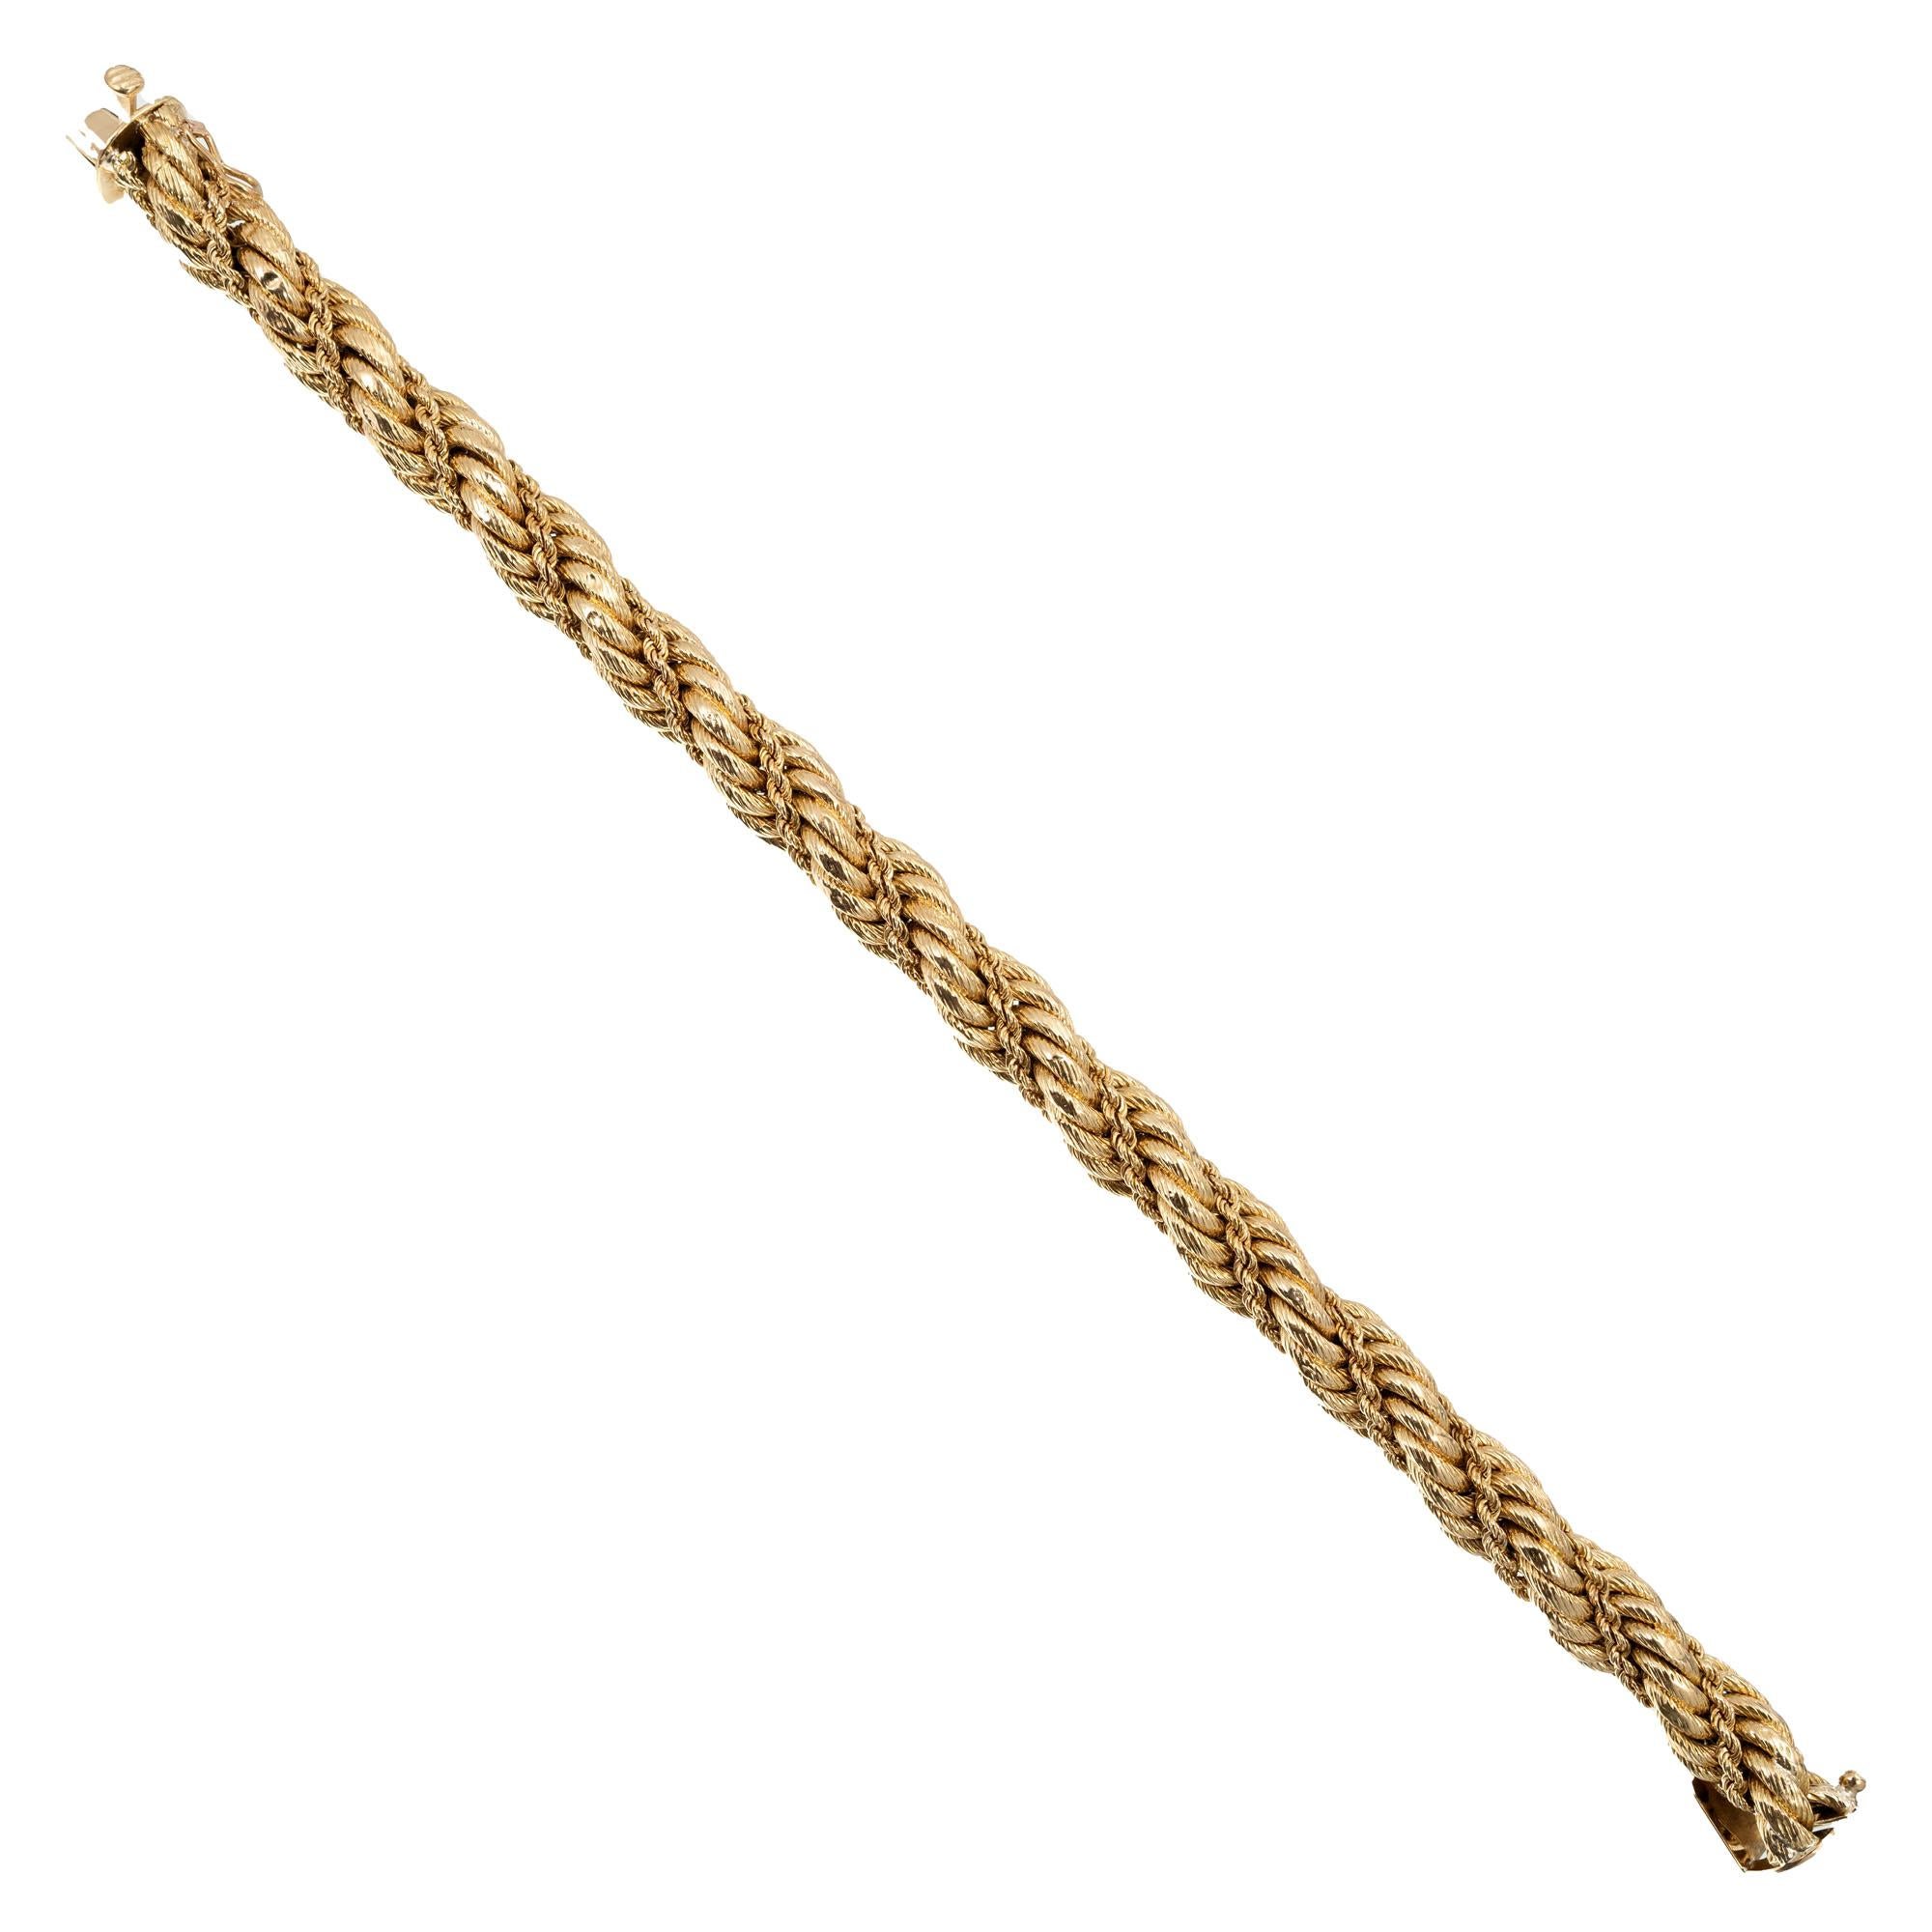 Tiffany & Co double twisted rope design 18k yellow gold bracelet. Large twisted rope accentuated by an intertwined with a smaller, thinner twisted rope. 

18k yellow gold 
Stamped: 18k Italy
Hallmark: Tiffany & Co
29.8 grams
Bracelet: 8